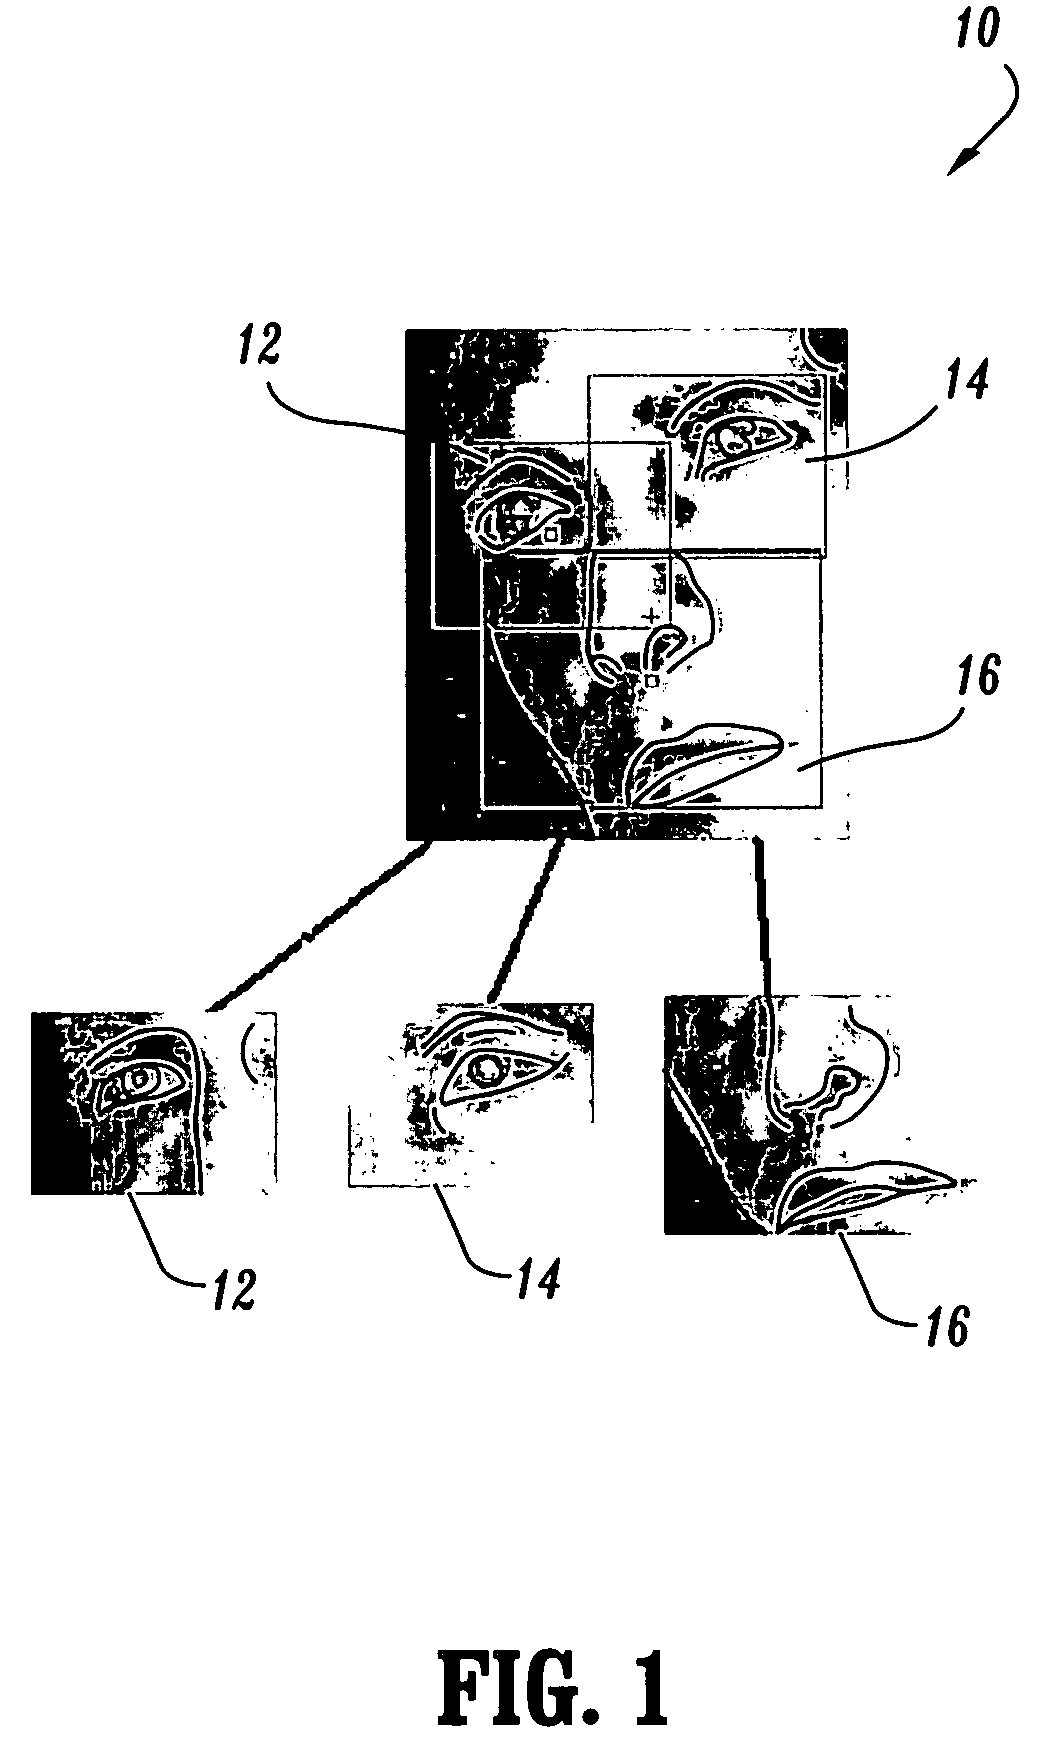 Systems and methods for face detection and recognition using infrared imaging